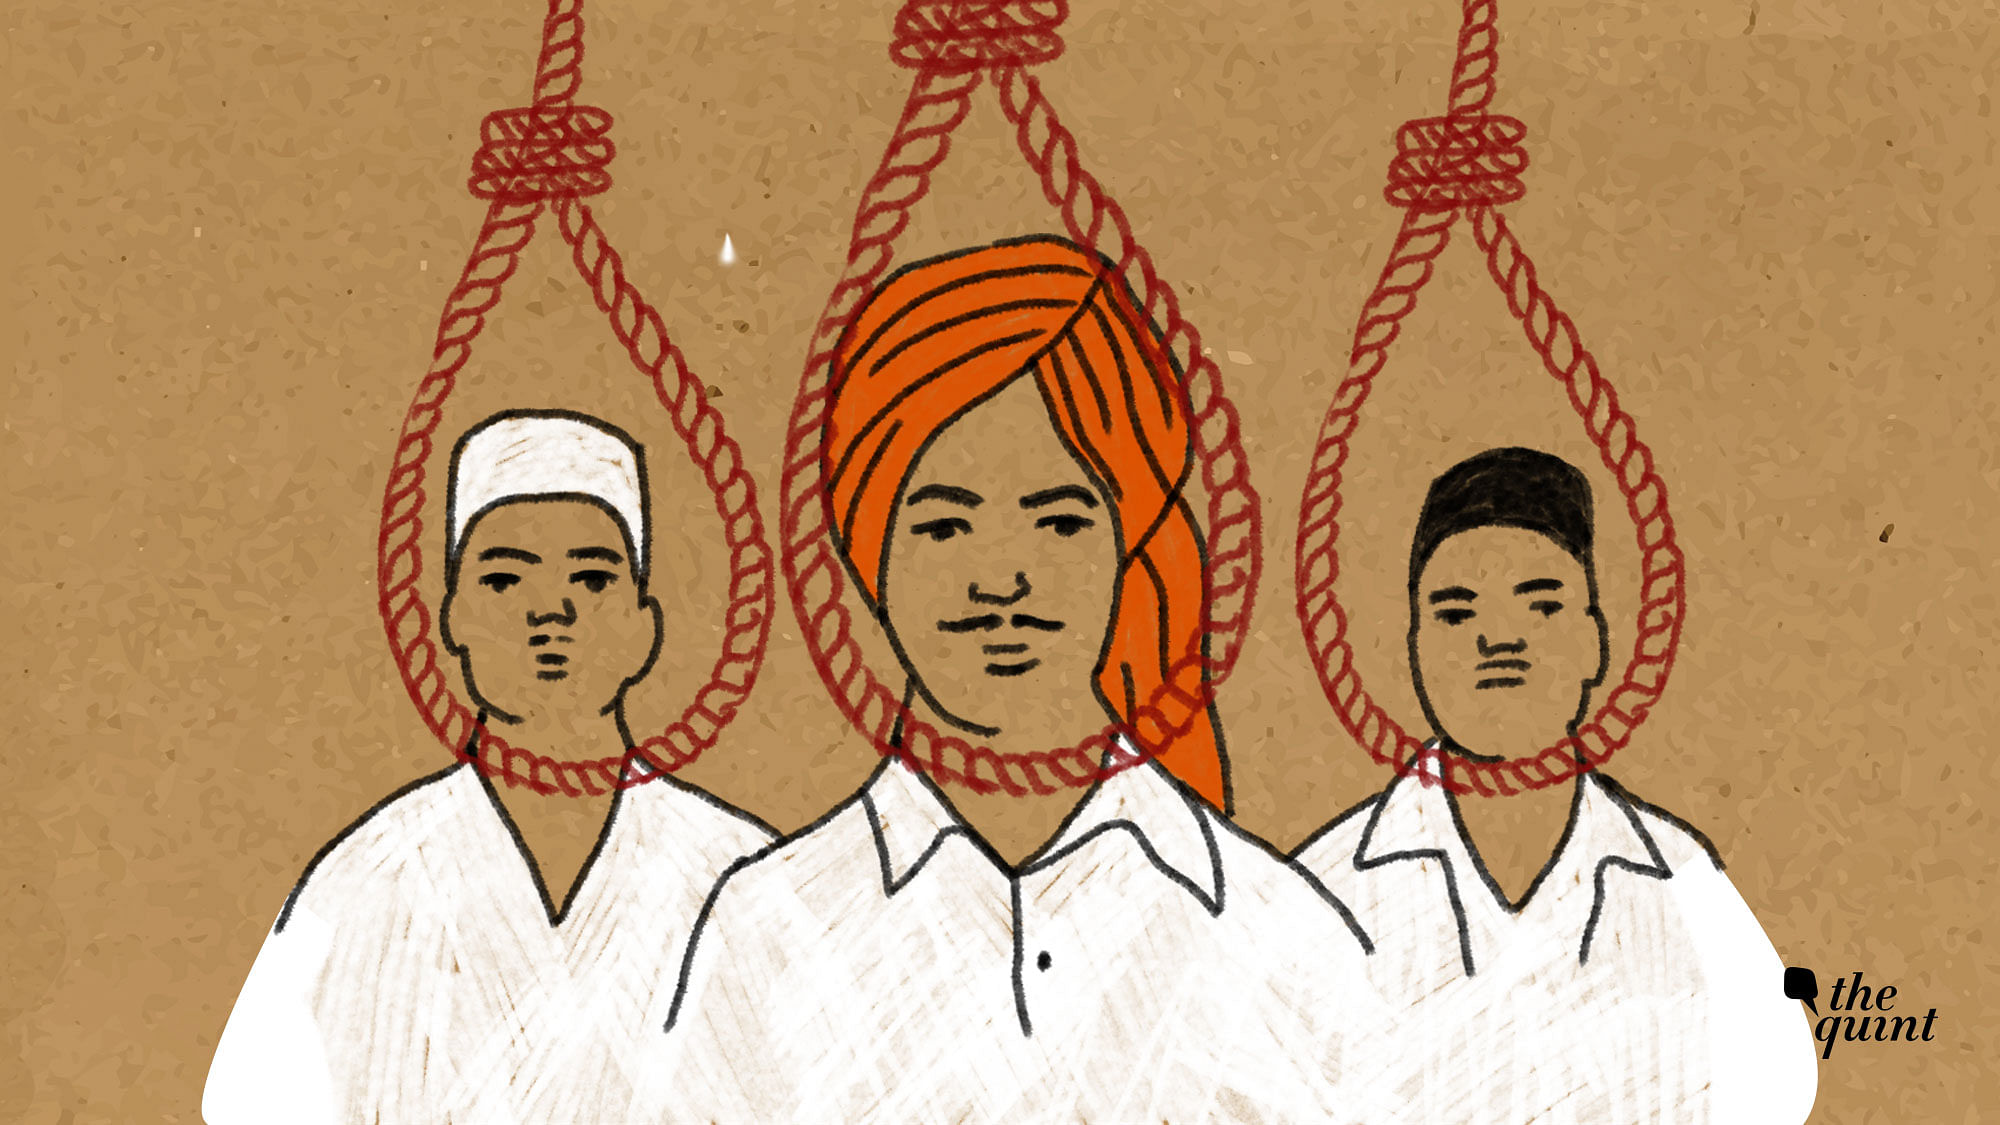 What influenced Bhagat Singh to join the struggle for Indian independence?